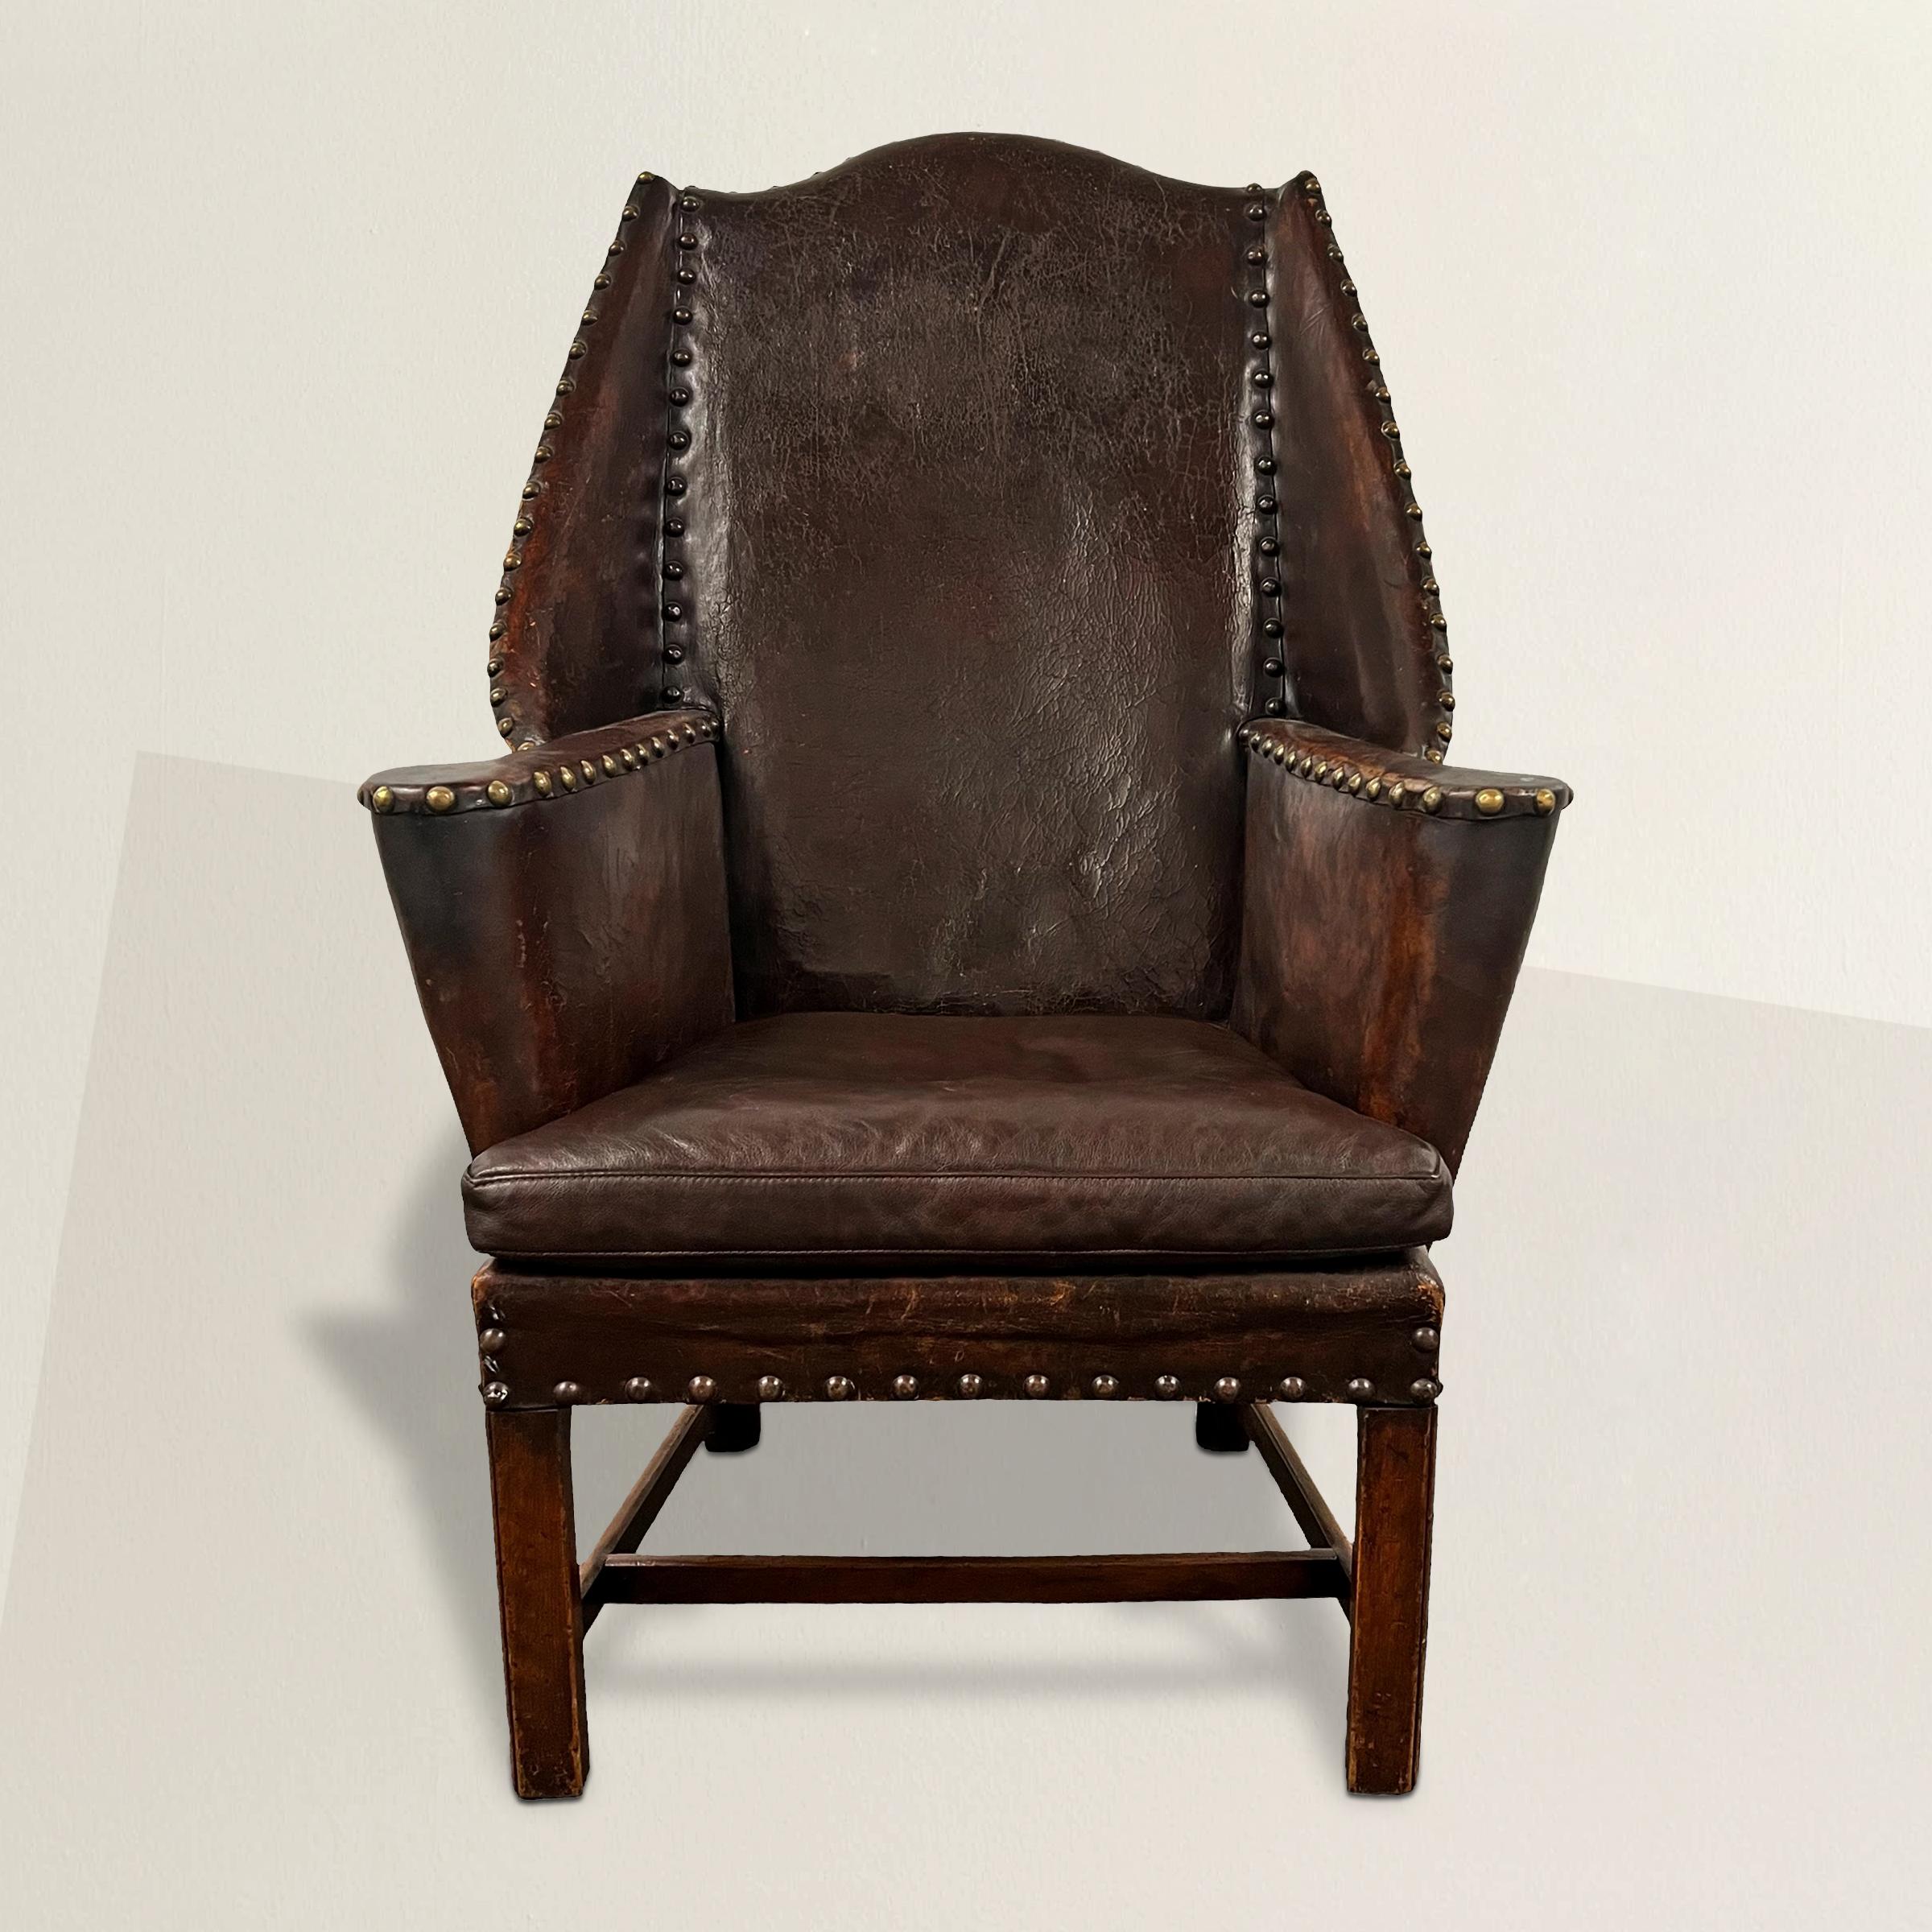 Embrace the refined elegance of 19th-century English design with this exquisite Georgian-style leather wing chair. Its intriguing flared wings, tapering down to meet out-turned arms, evoke a sense of timeless sophistication. Upholstered in its